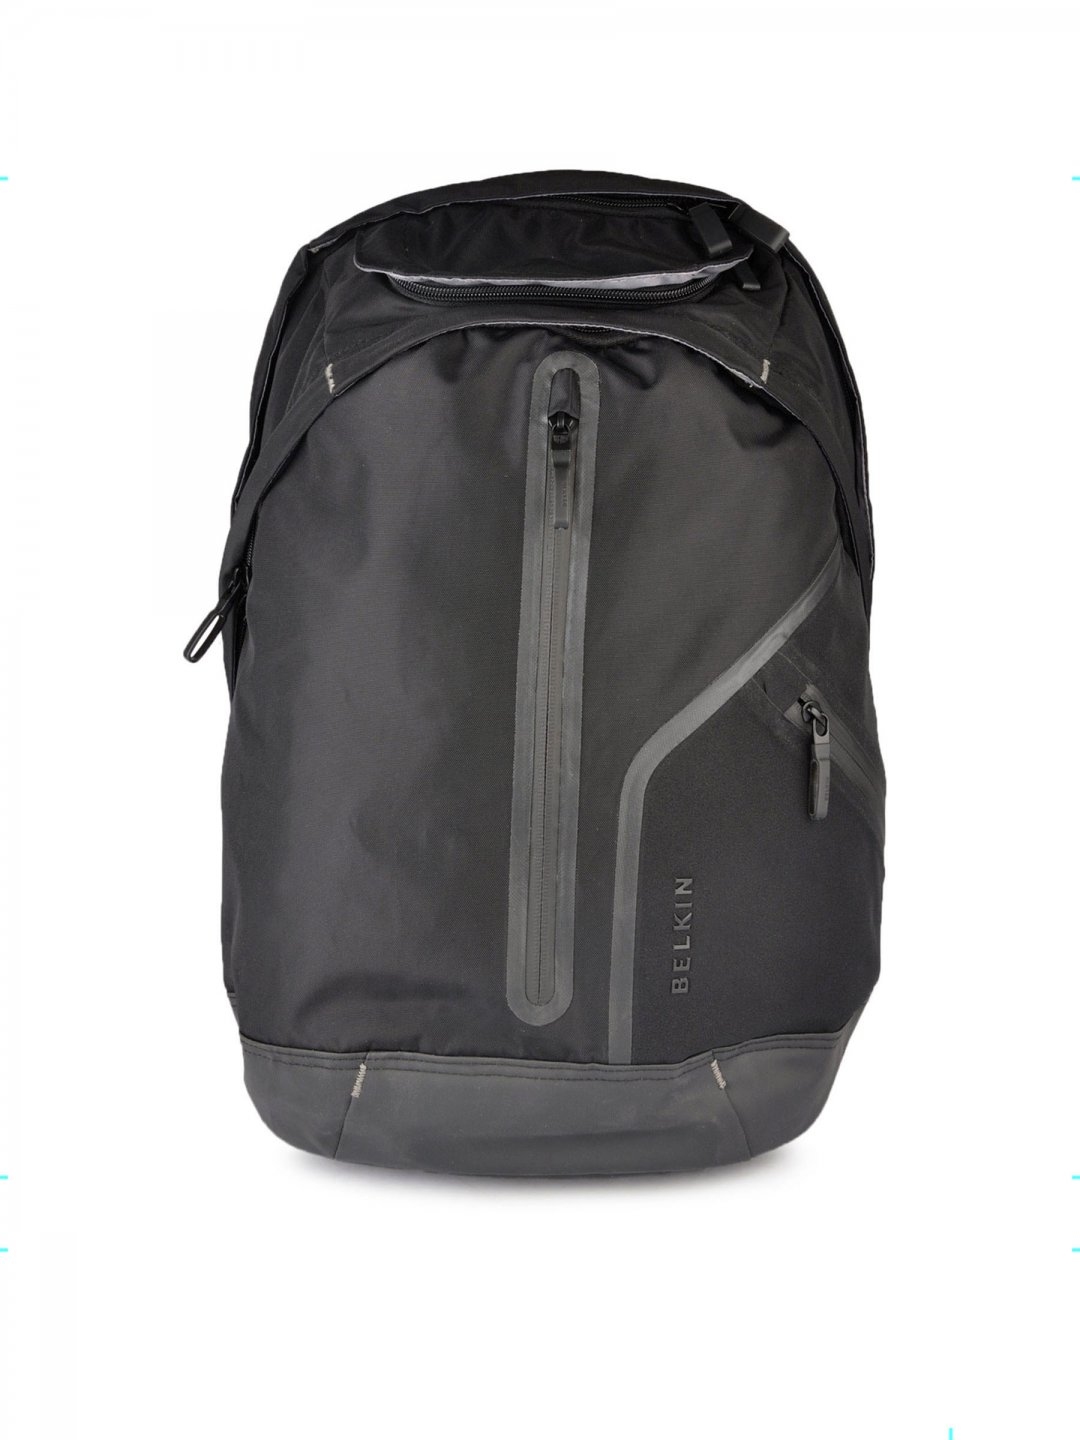 Belkin Laptop Bags - Get Best Price from Manufacturers & Suppliers in India